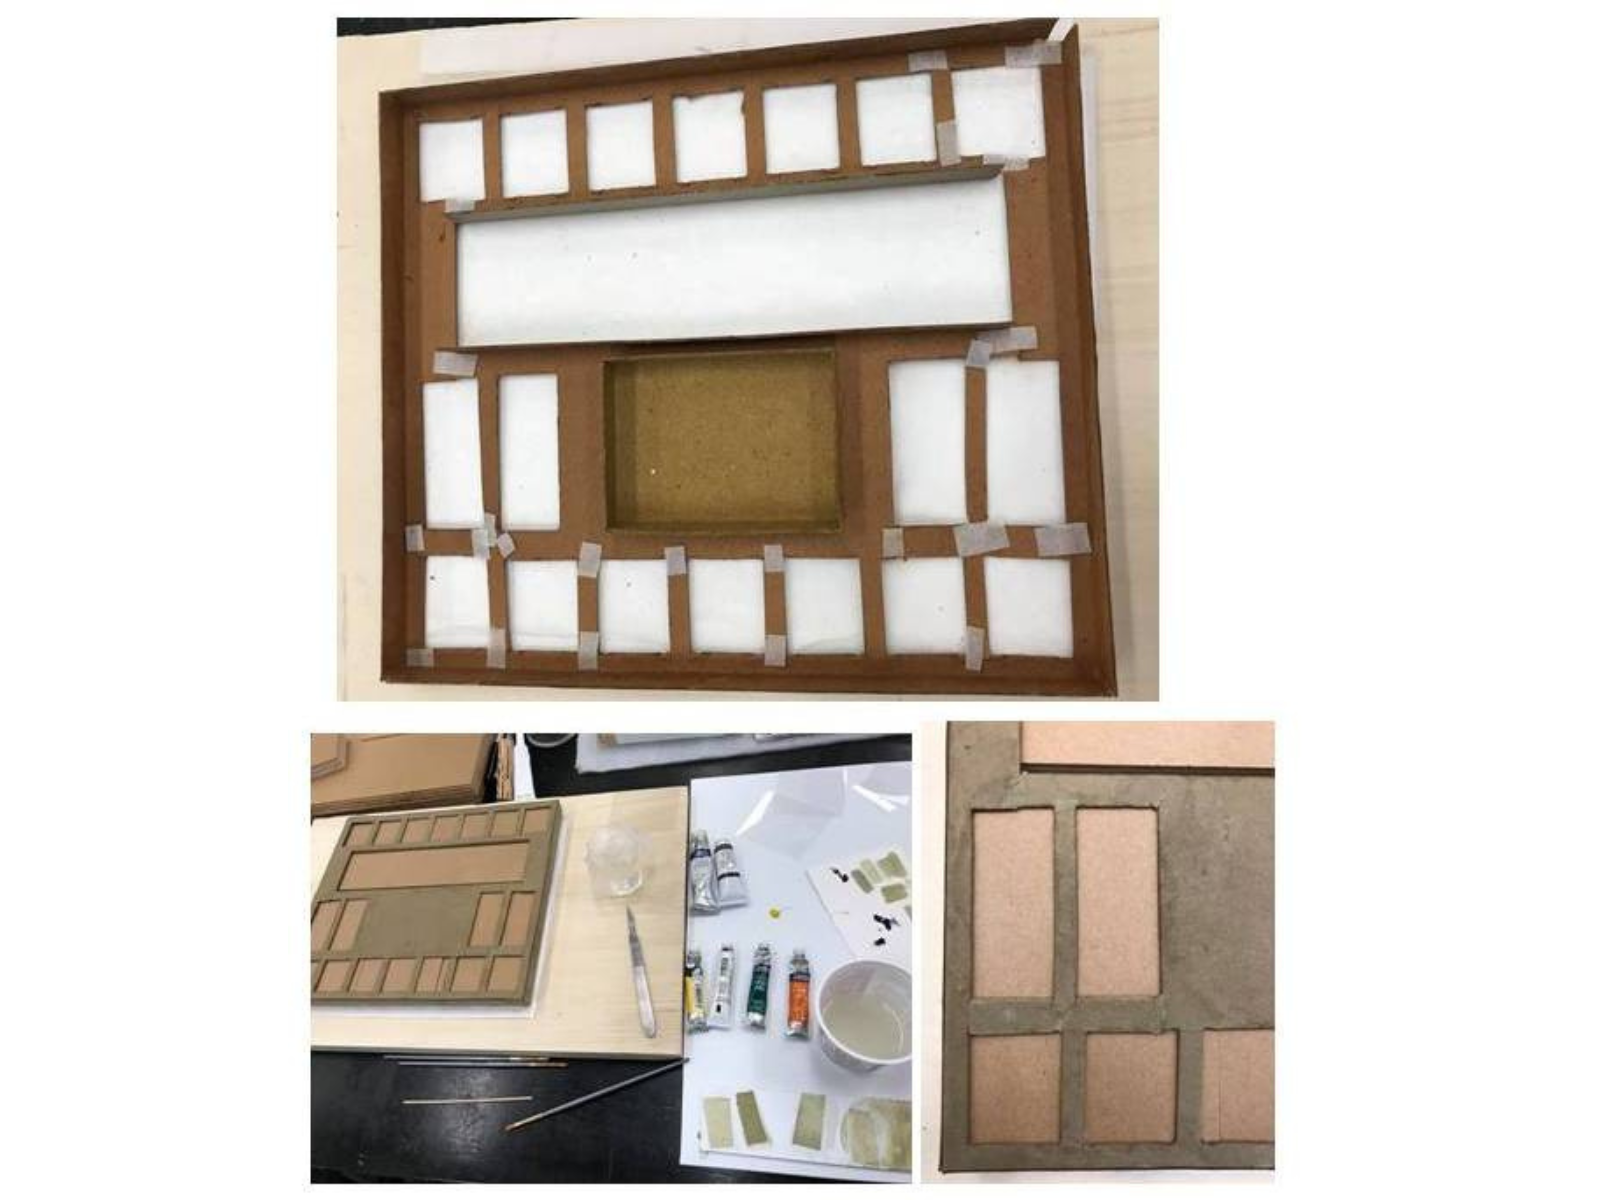 Three images in a collage. On the top, the cardboard insert being repaired with light coloured pieces of mending paper along the weak or torn joints of the insert. On the bottom left, the cardboard insert beside painting supplies, as the mending paper is painted with watercolours to blend in with the cardboard. On the bottom right, close up of the tinted mending paper now painted to match the cardboard insert.